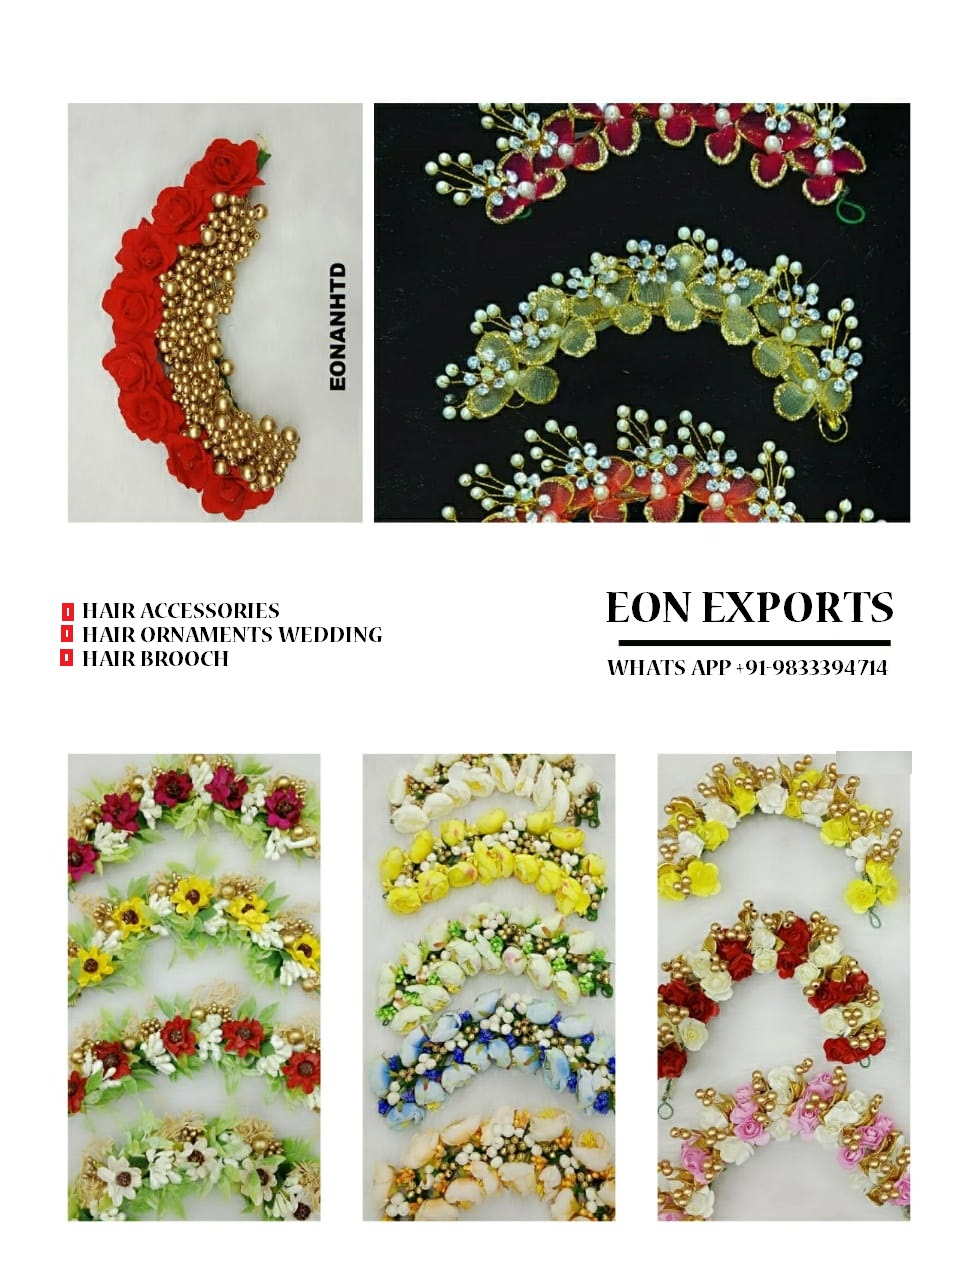 Hair Accessories - Manufacturers, Suppliers From Ahmedabad